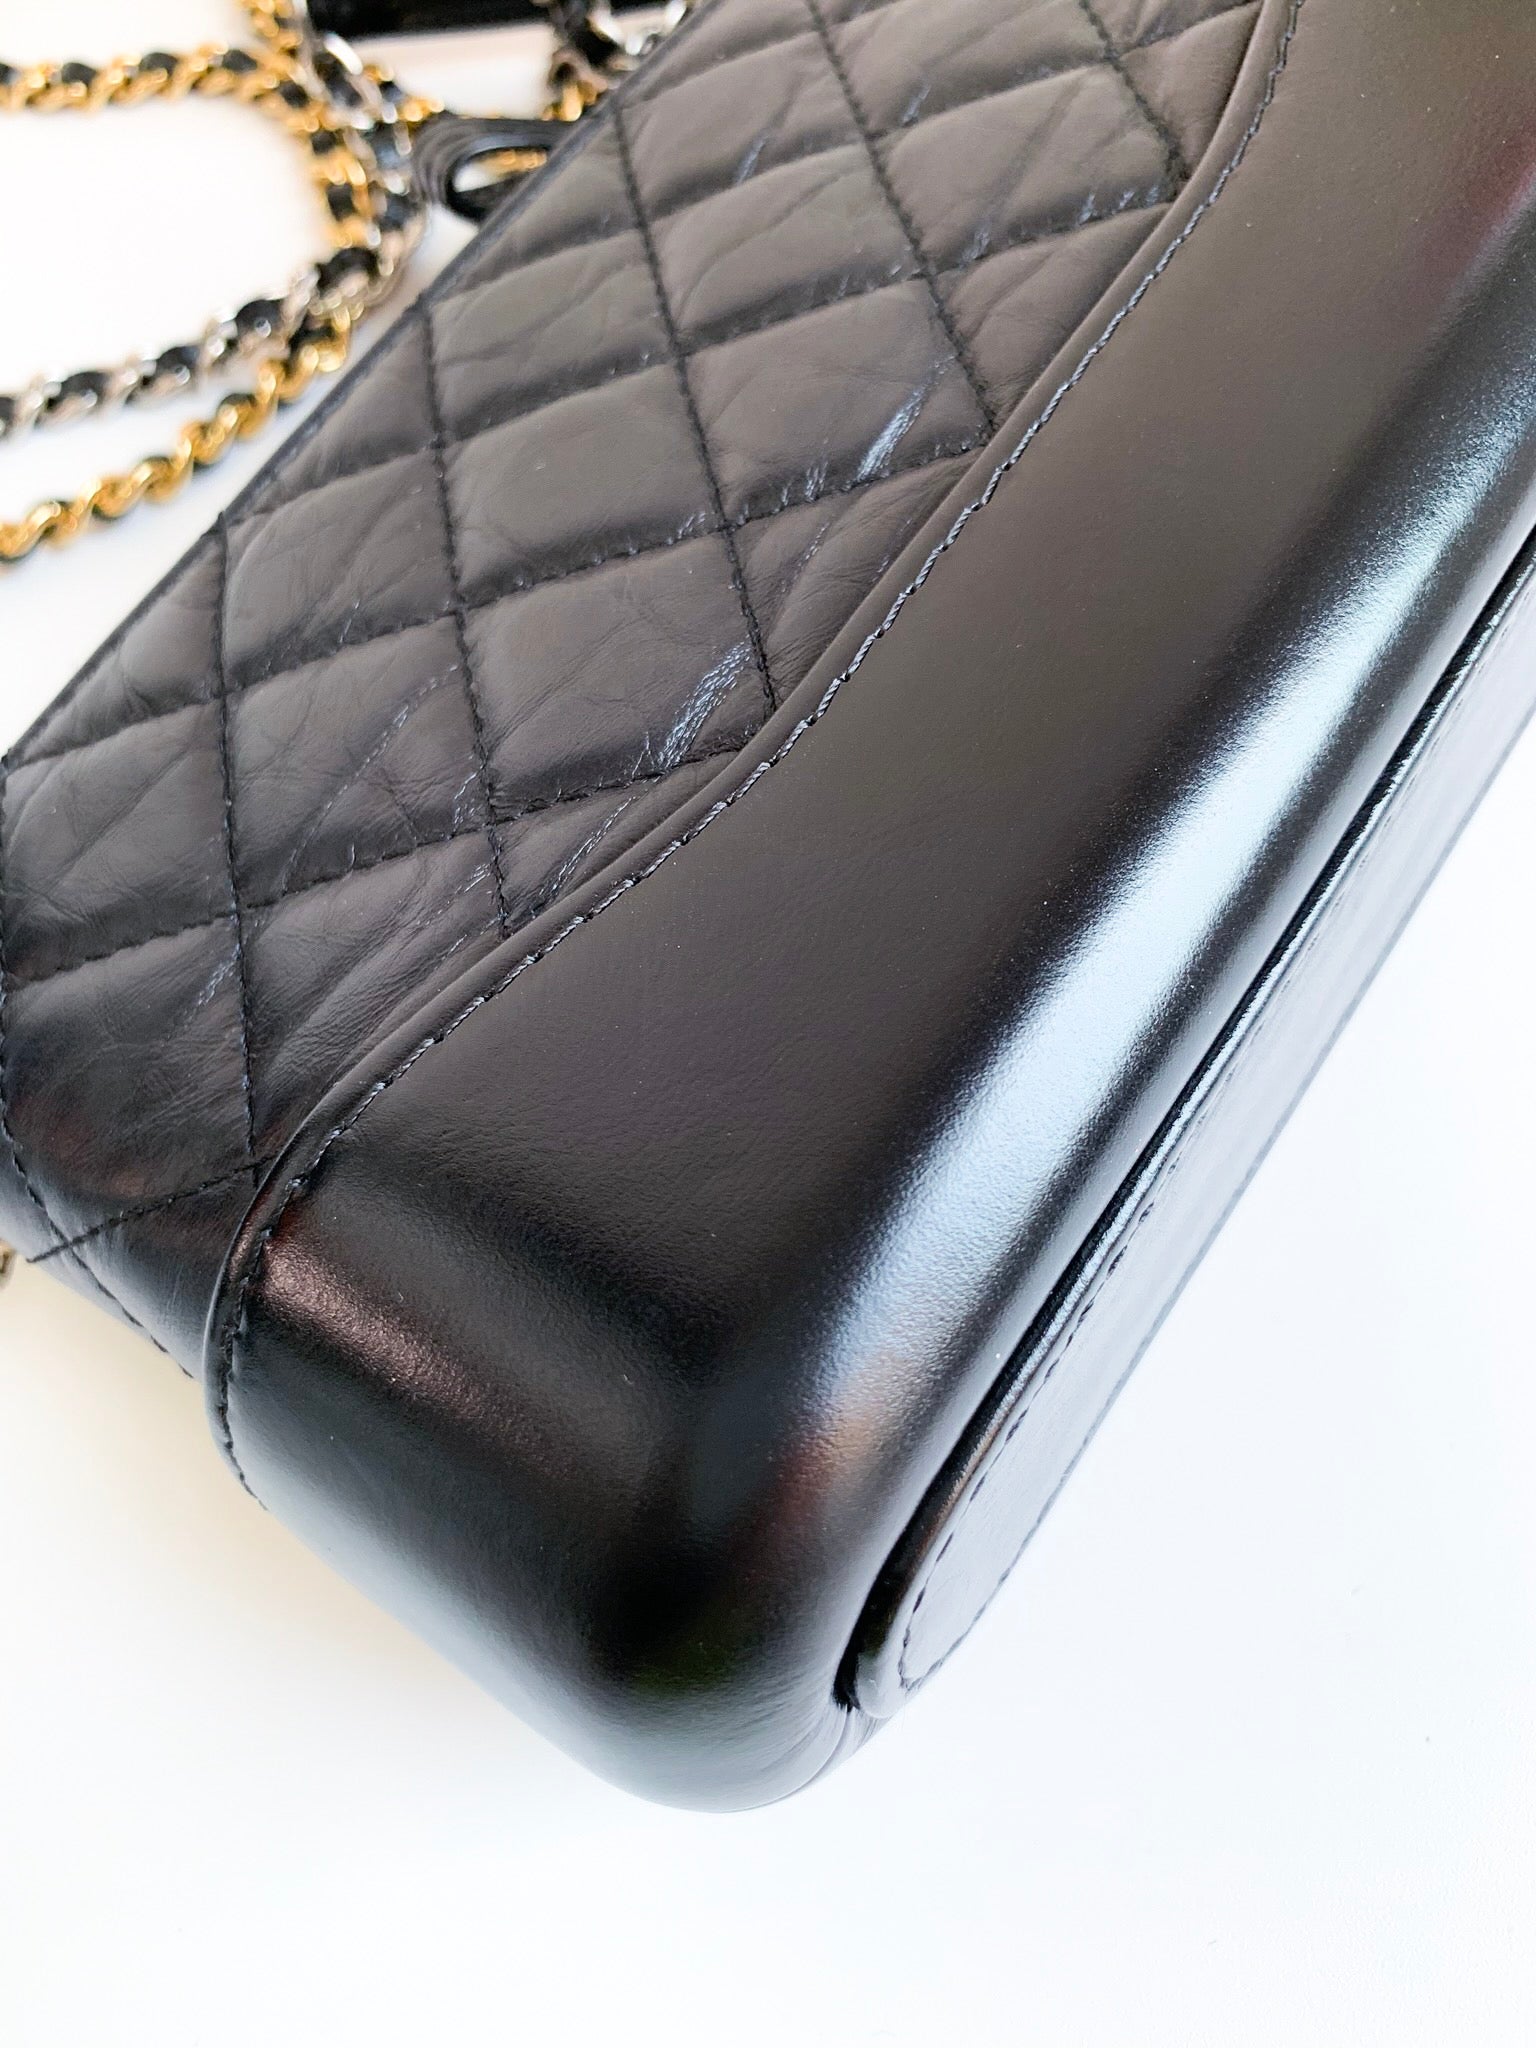 CHANEL Gabrielle clutch with two chains silver and gold – U & Moi